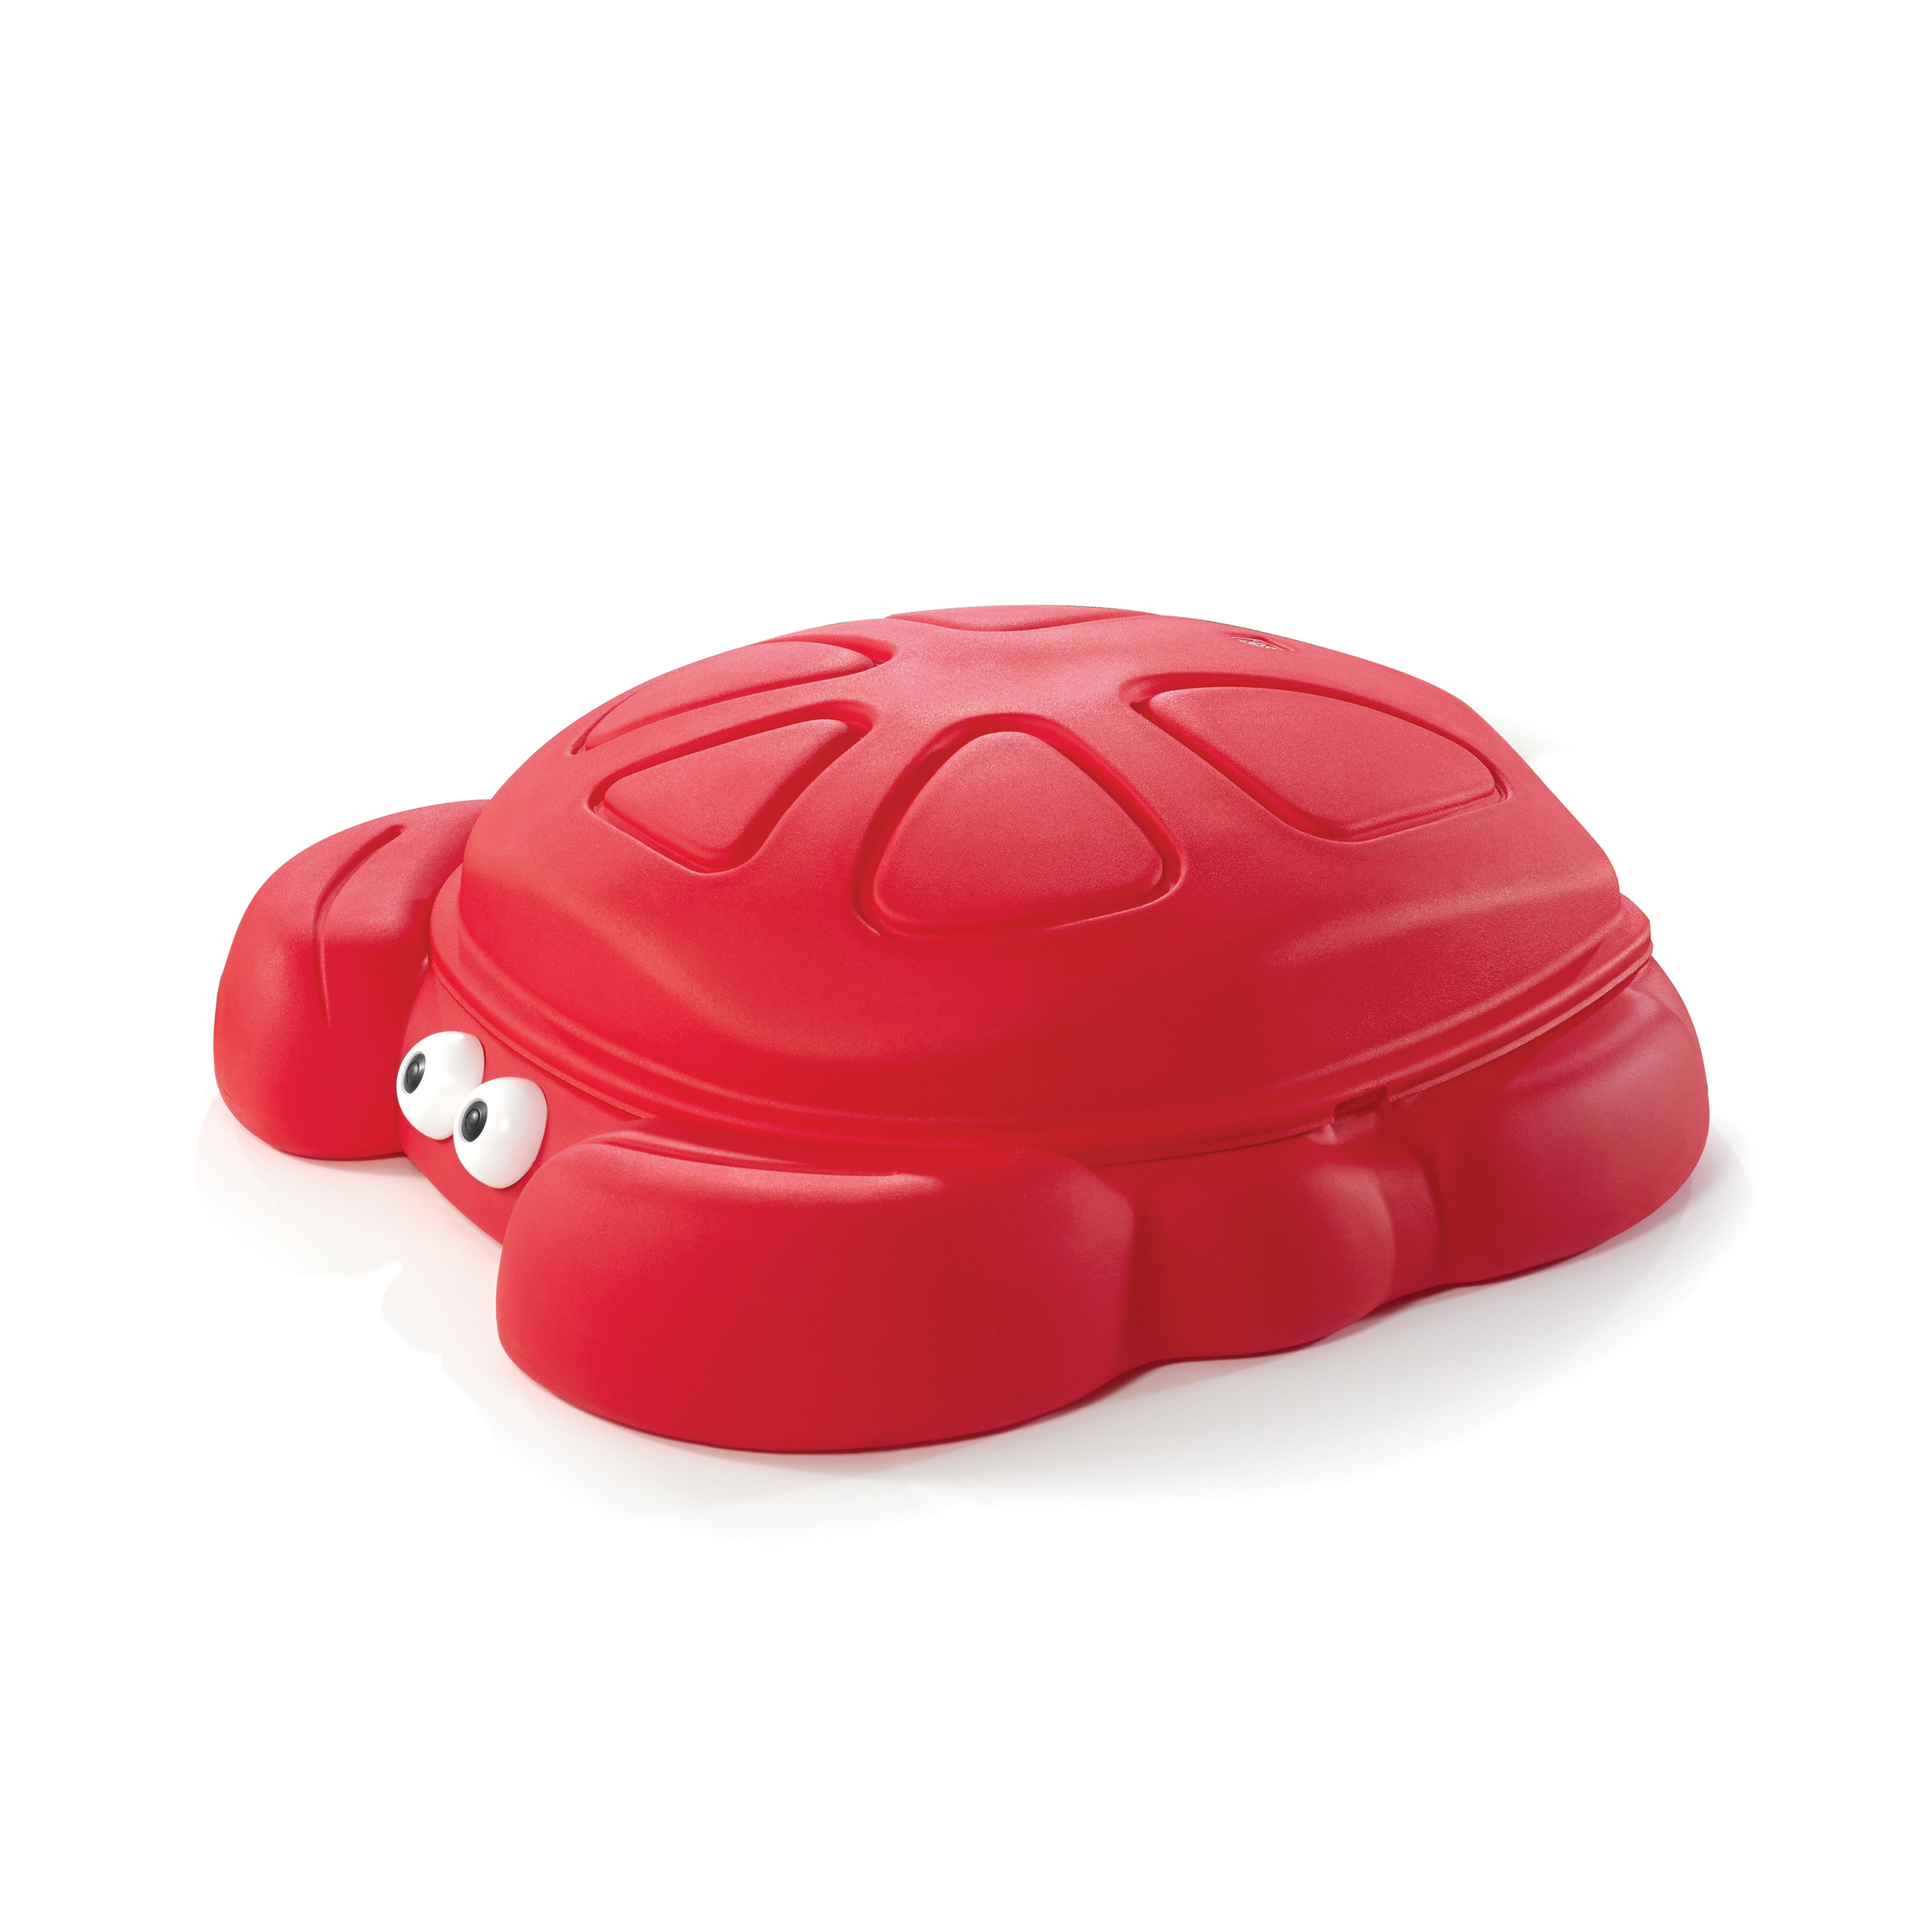 Step2 Crabbie Sandbox Red Plastic Outdoor Sandbox with Cover for Kids - image 4 of 6